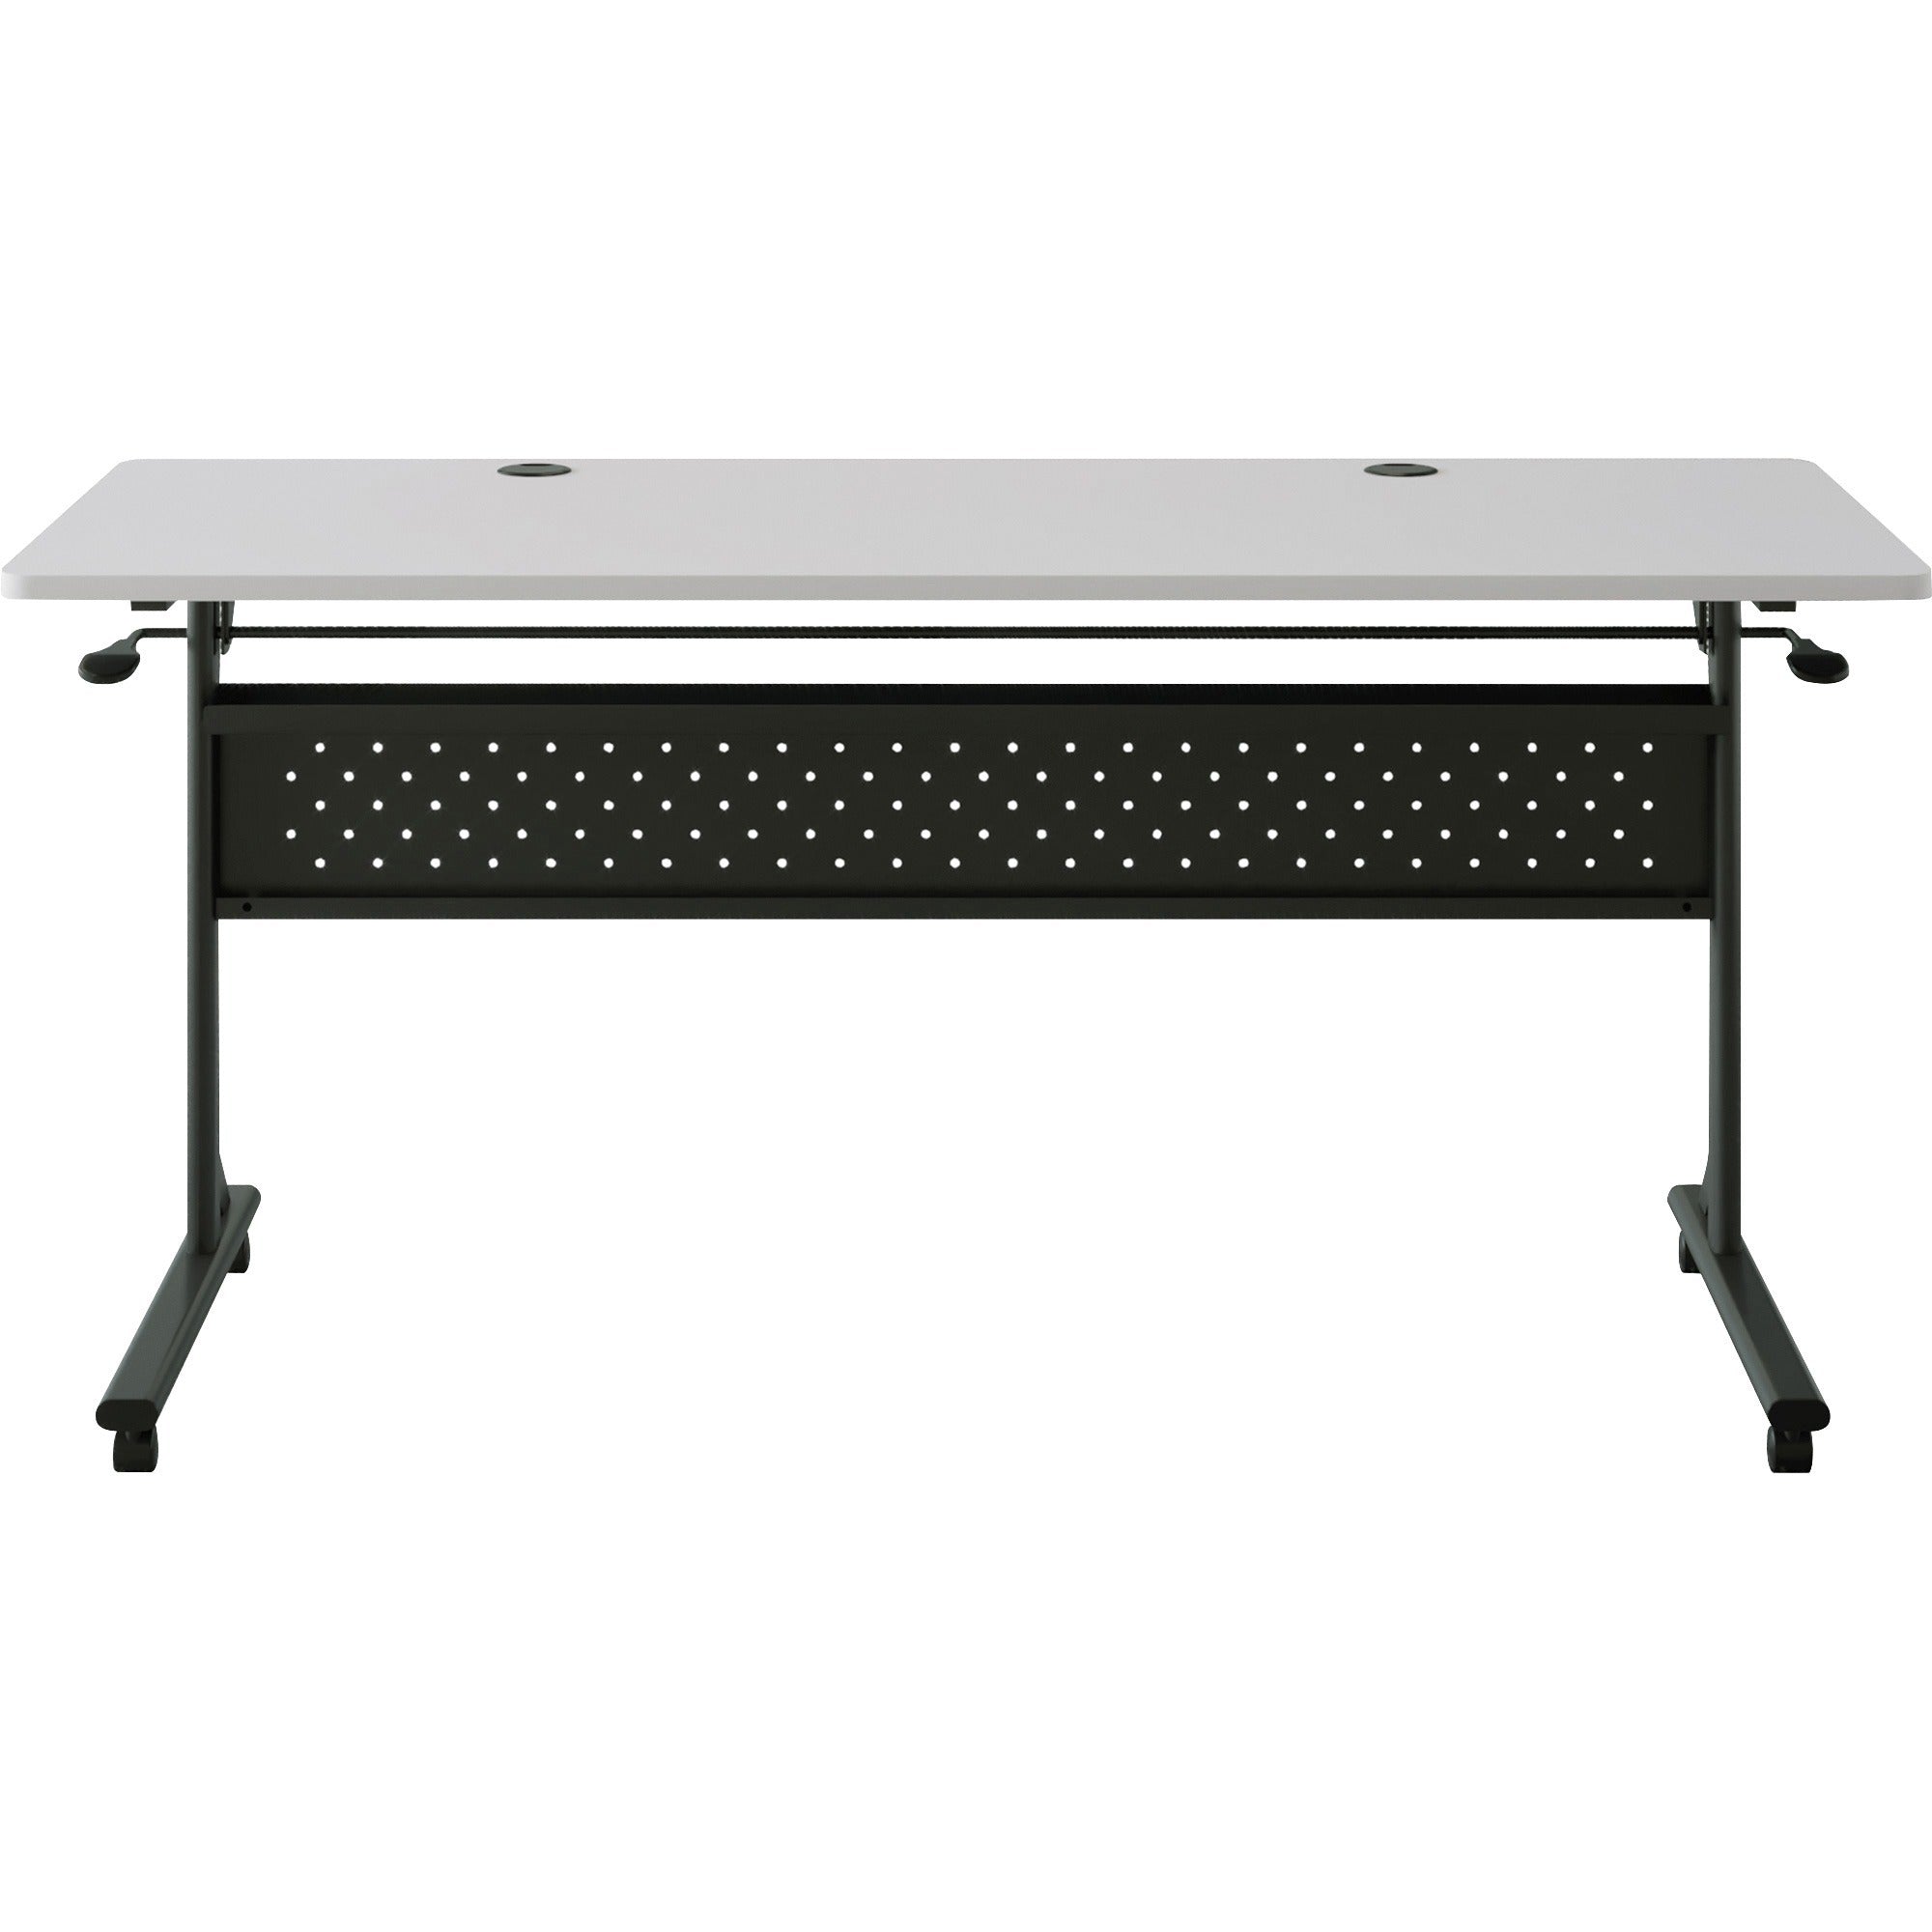 lorell-shift-20-flip-and-nesting-mobile-table-for-table-toplaminated-rectangle-top-60-table-top-length-x-24-table-top-width-x-1-table-top-thickness-2950-height-assembly-required-gray-1-each_llr60766 - 3